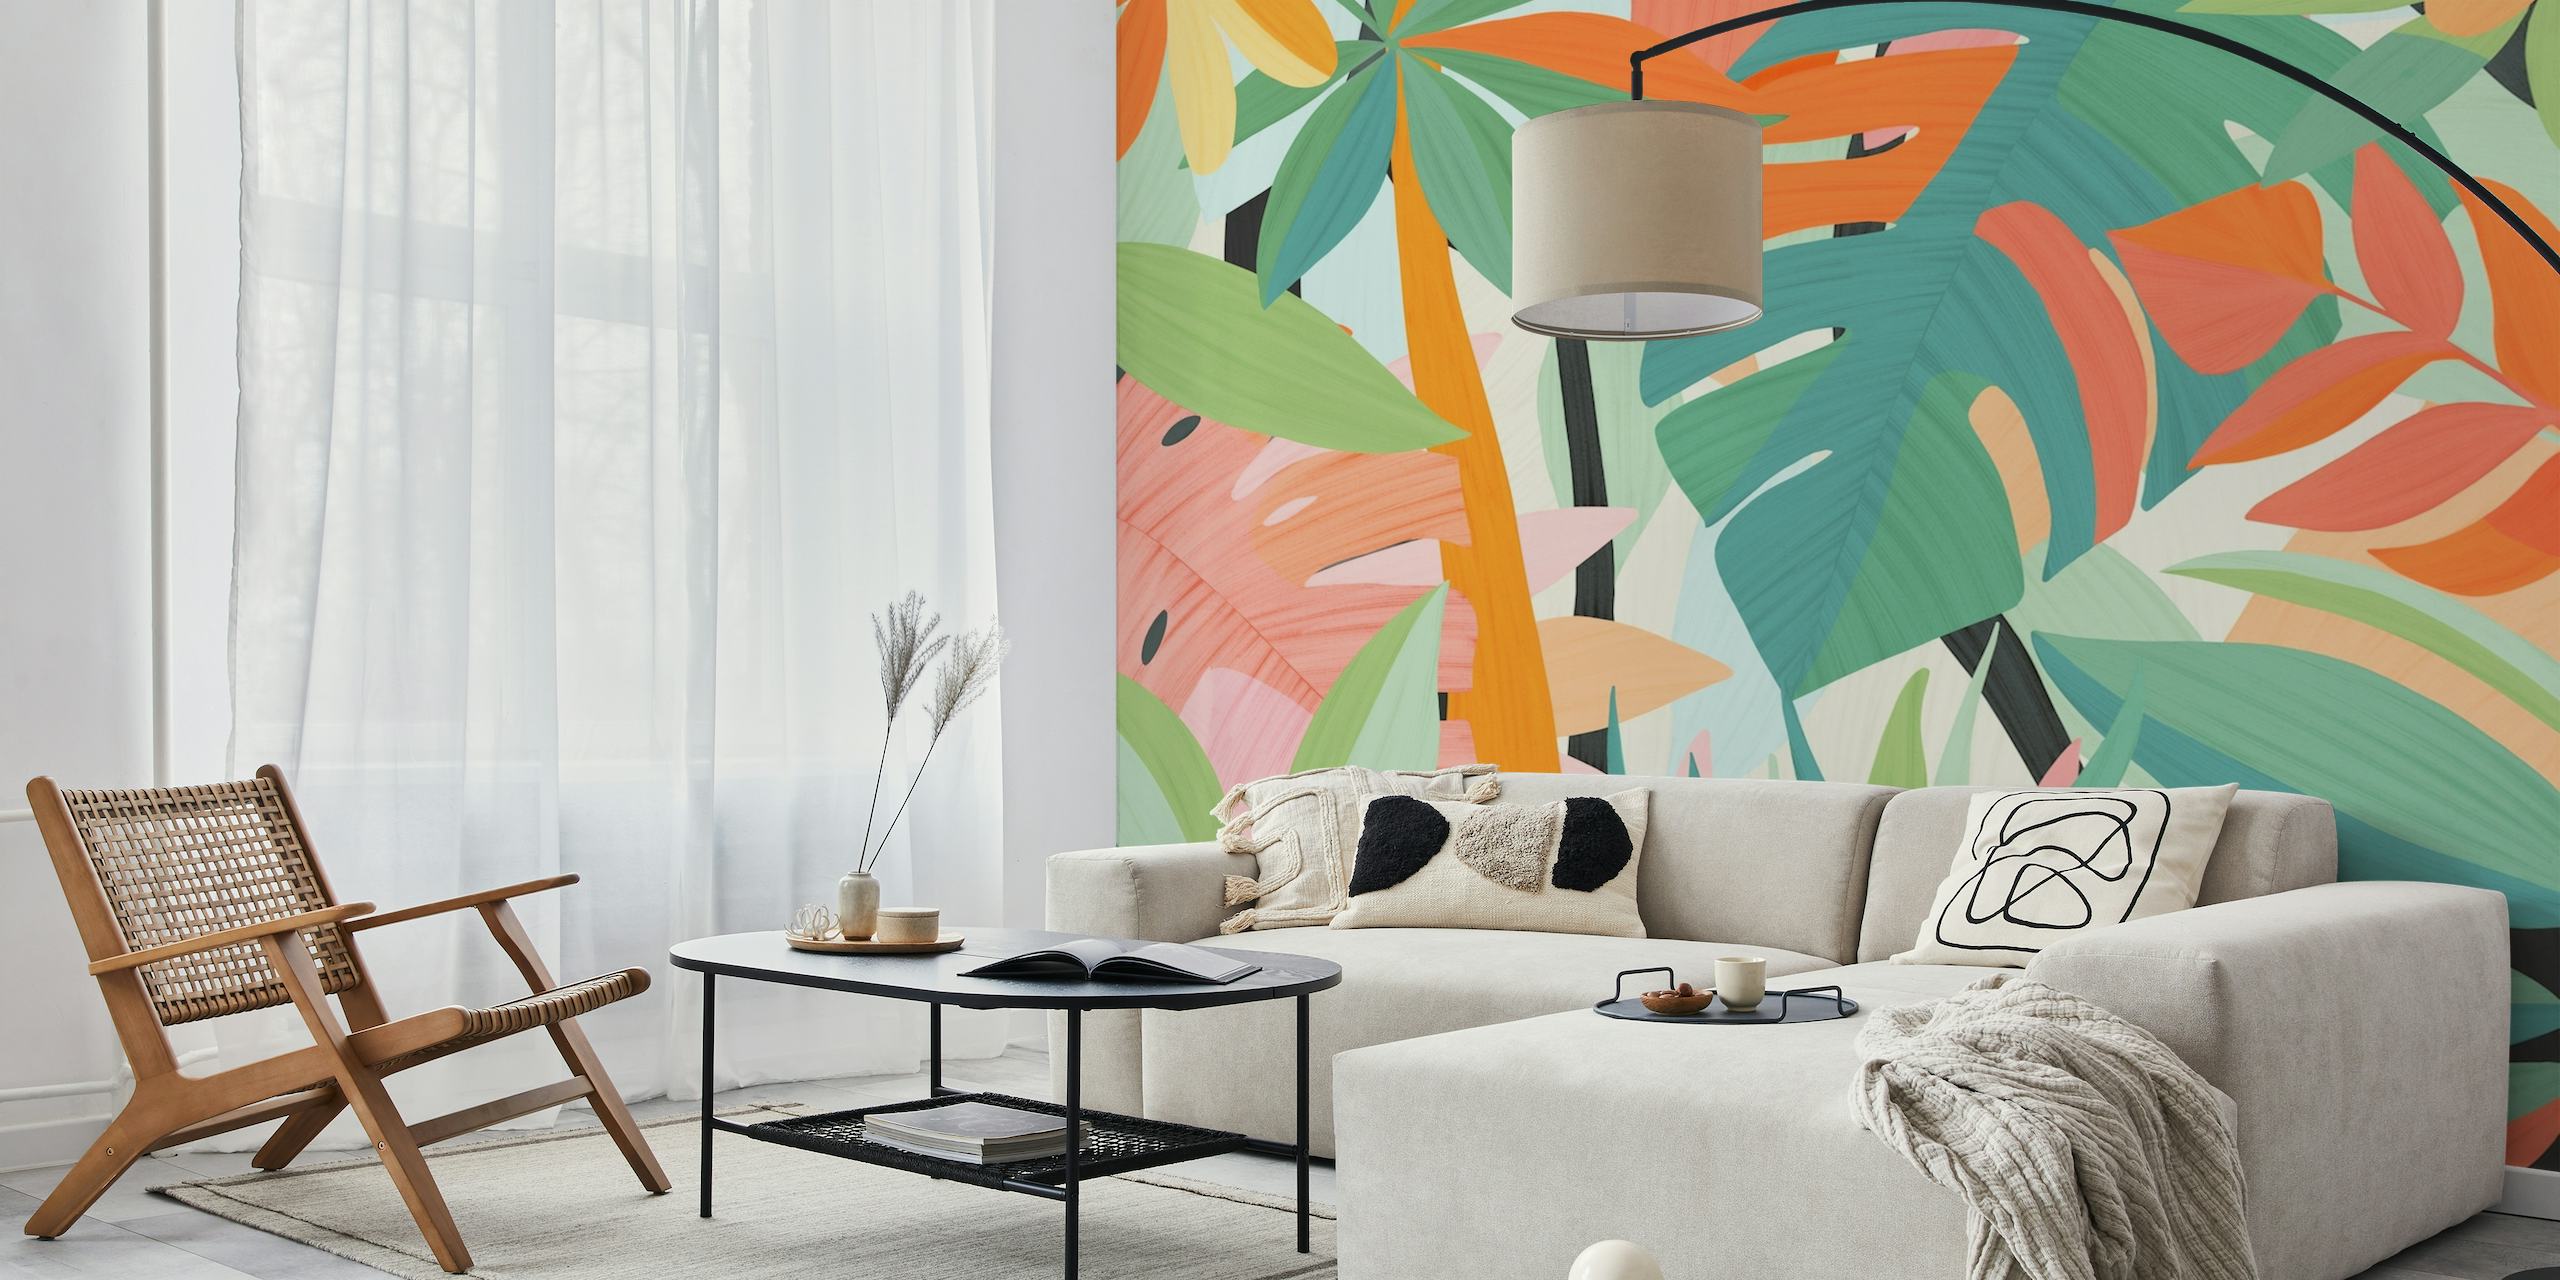 Vibrant tropical forest wall mural with rich green foliage and warm orange-pink accents